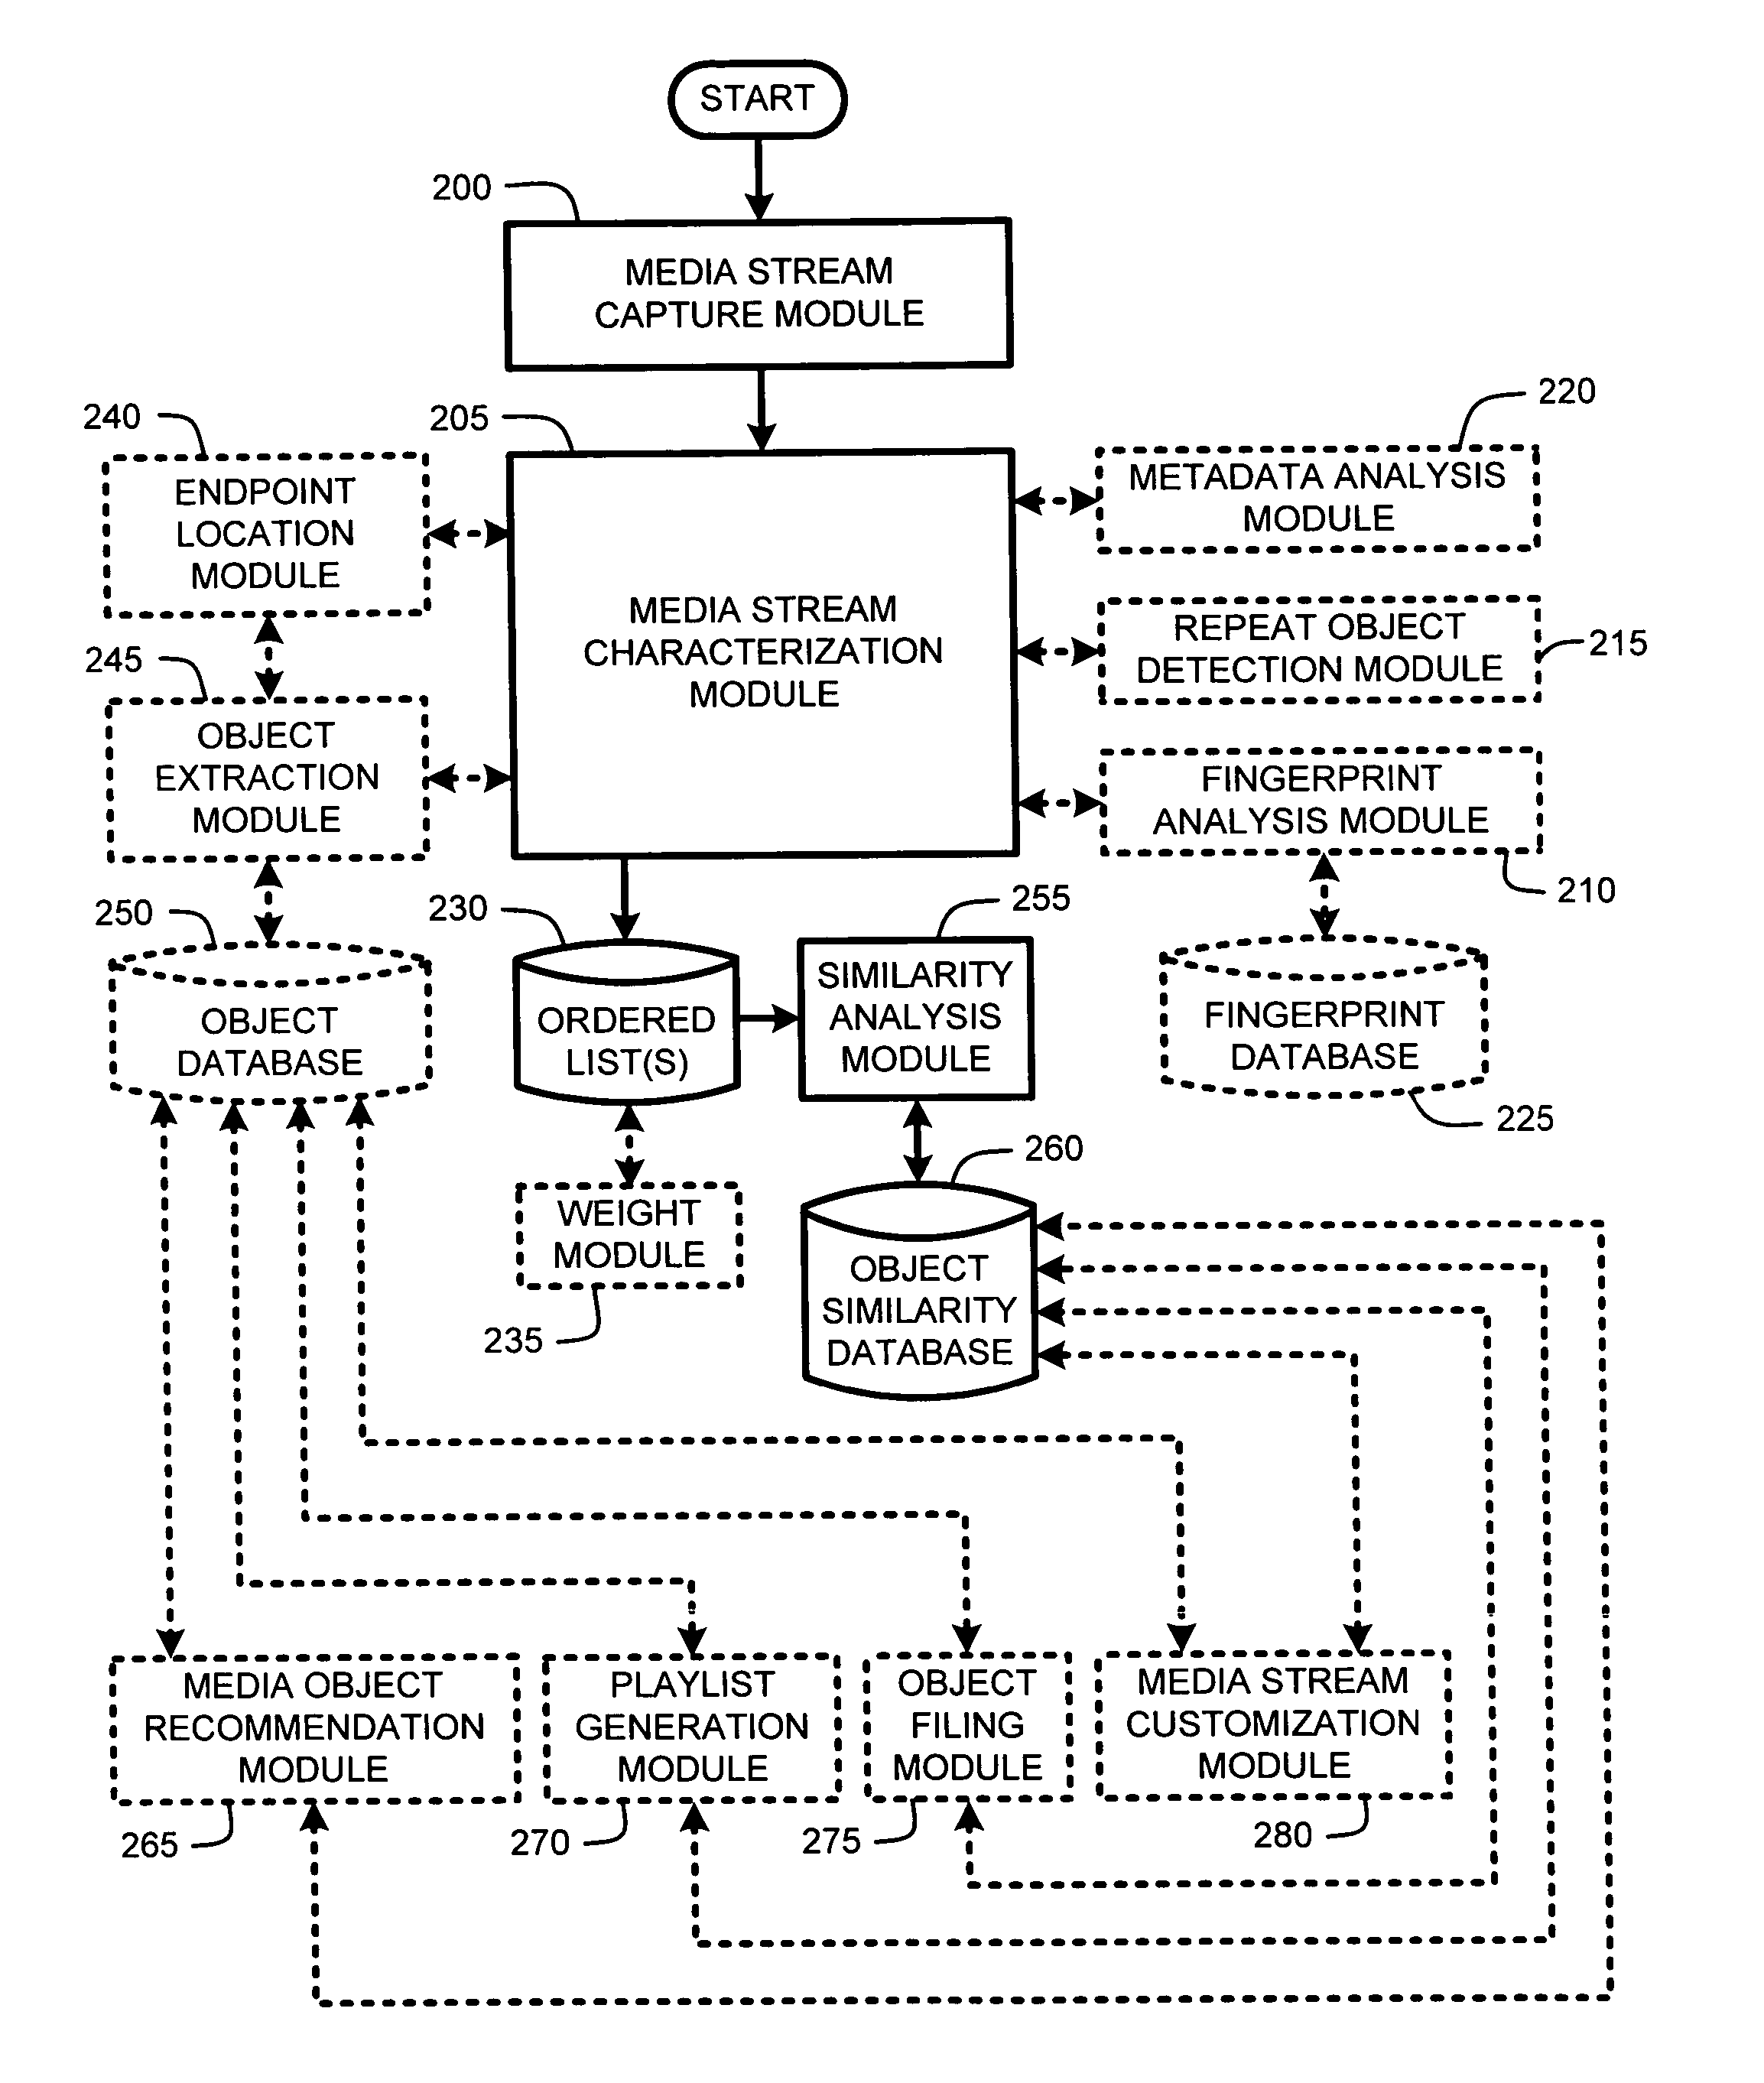 System and method for inferring similarities between media objects